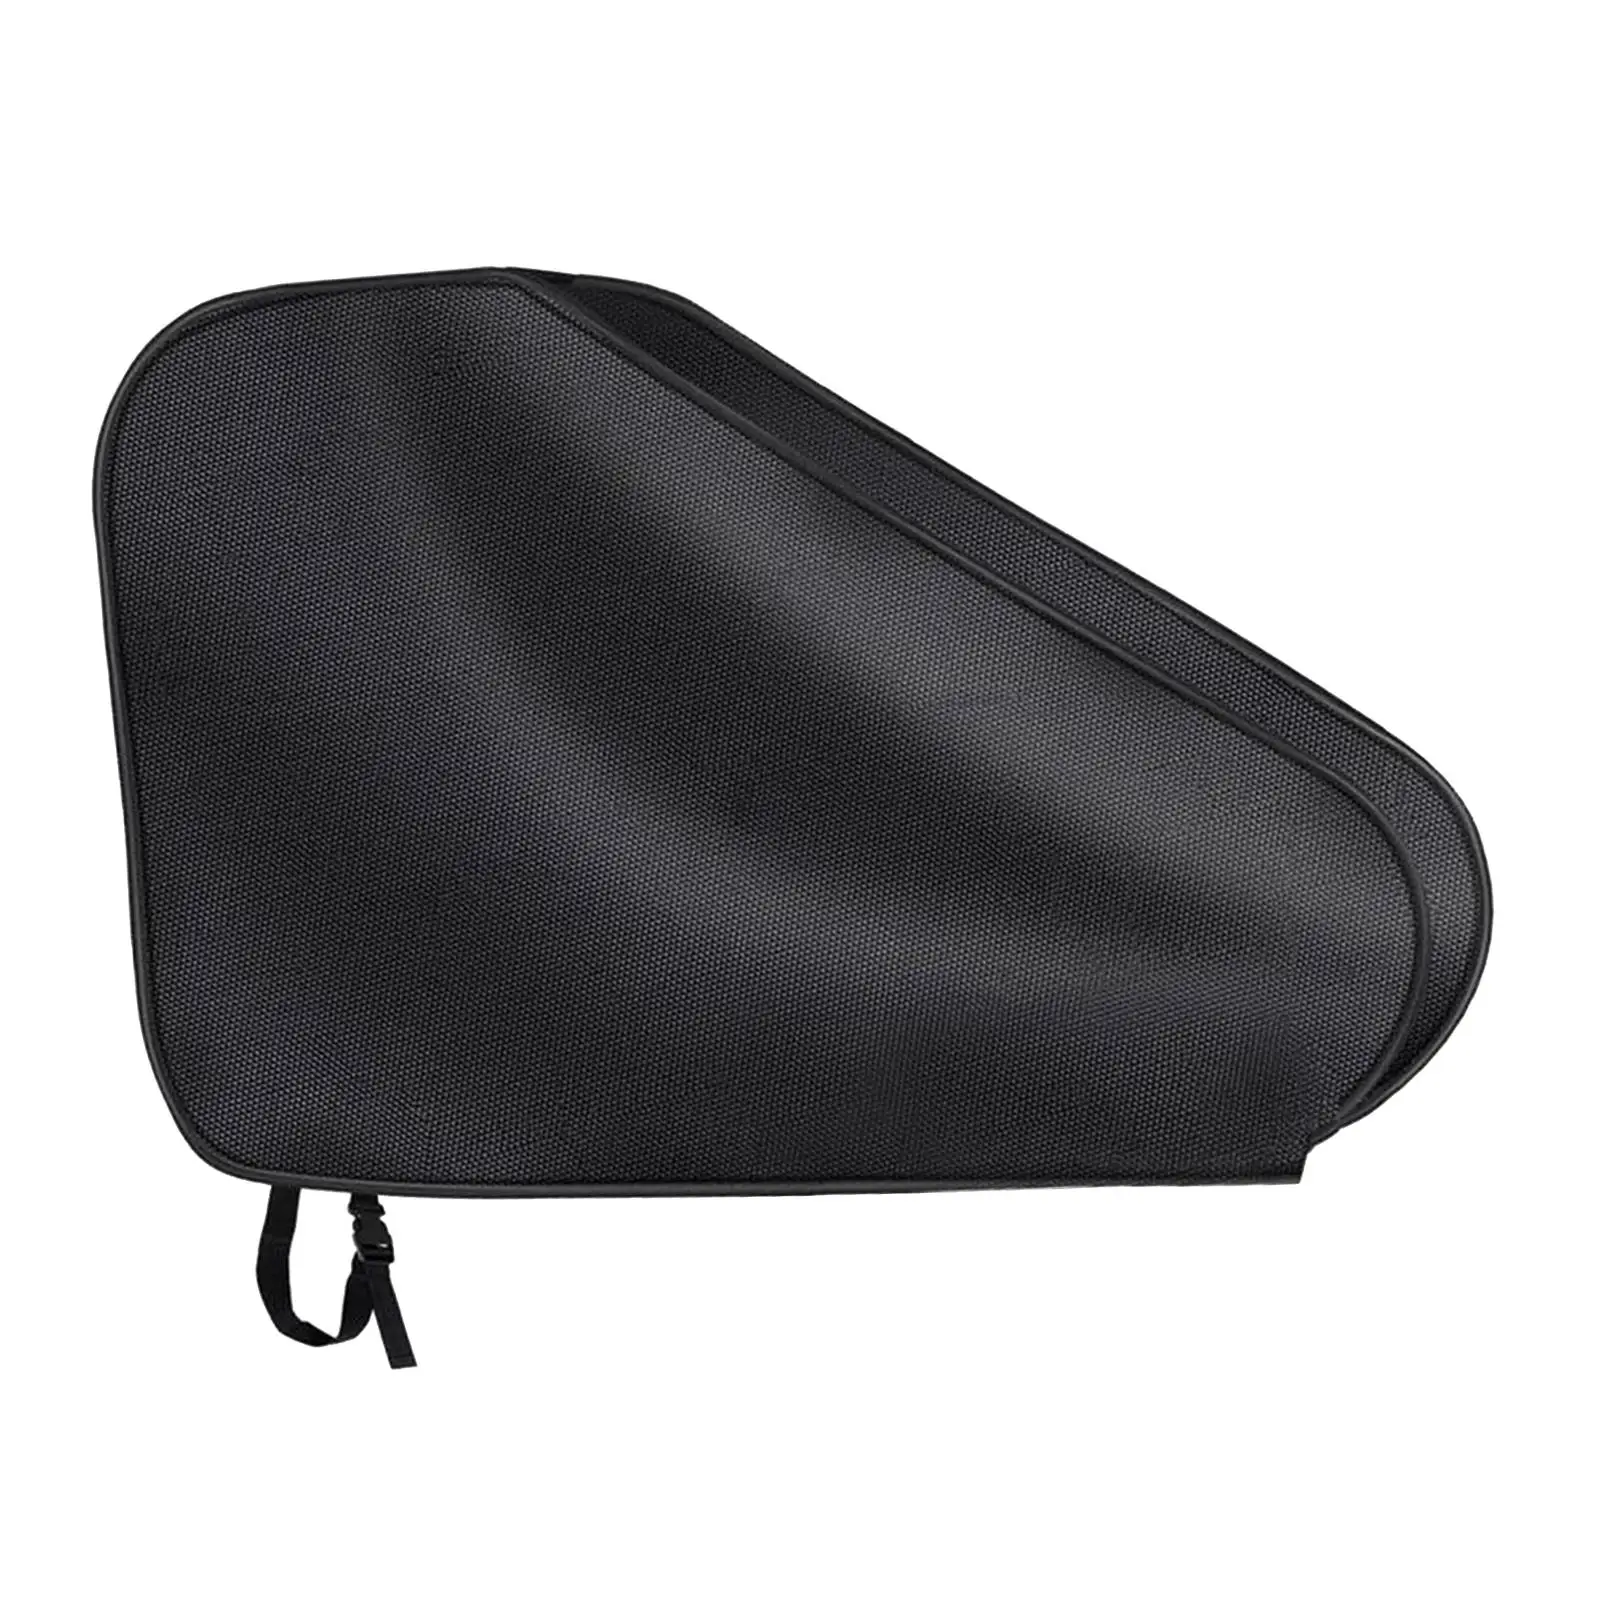 Caravan Hitch Cover 600D Oxford Cloth Breathable Universal Tongue Jack Cover